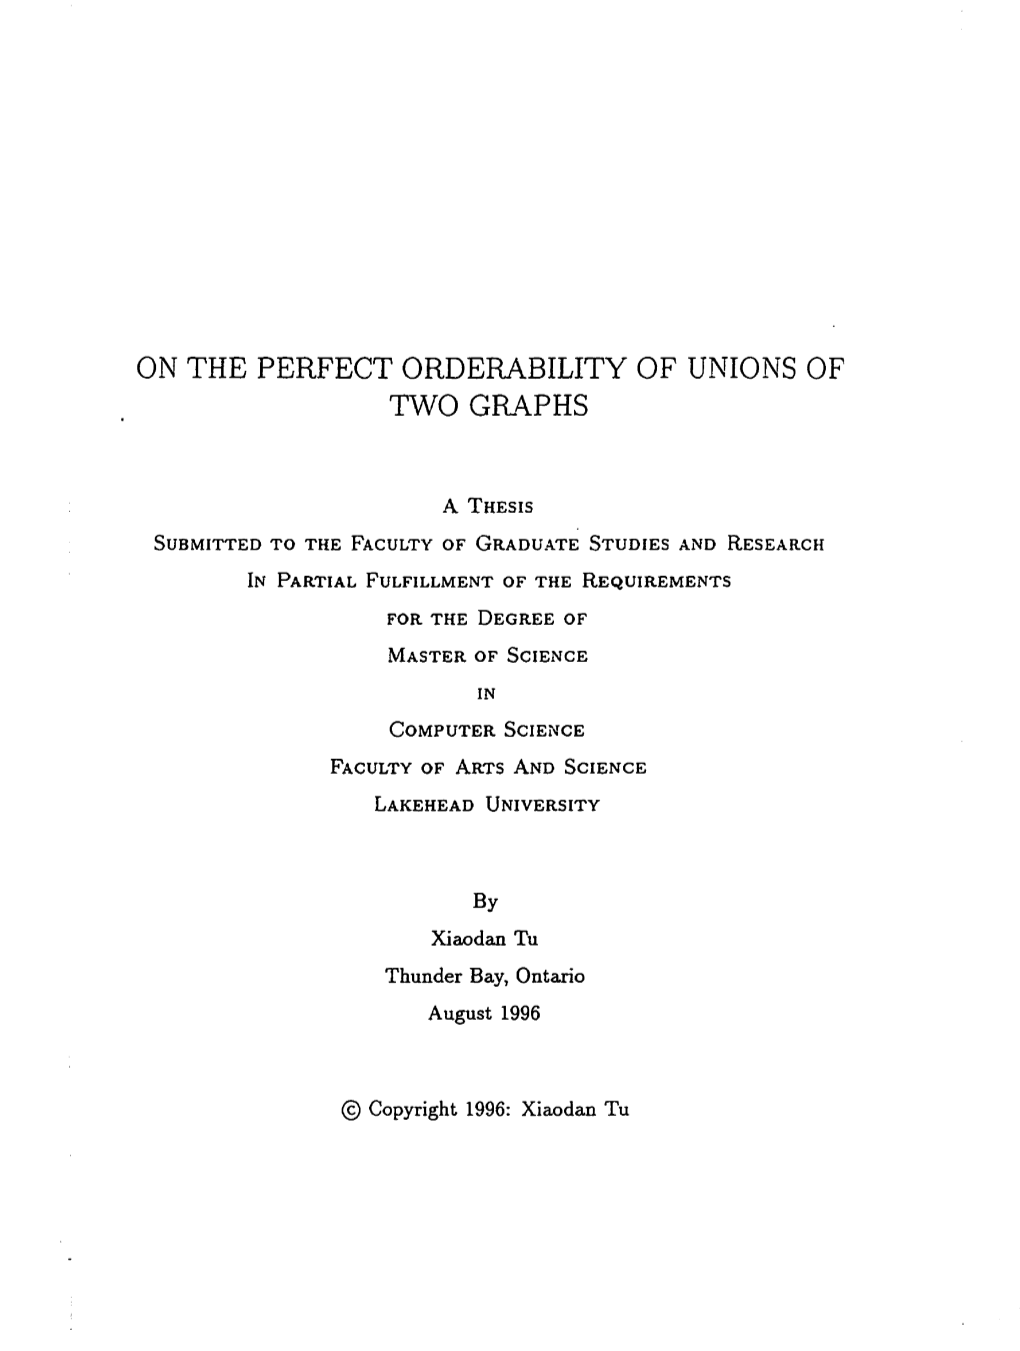 On the Perfect Orderability of Unions of Two Gr4phs